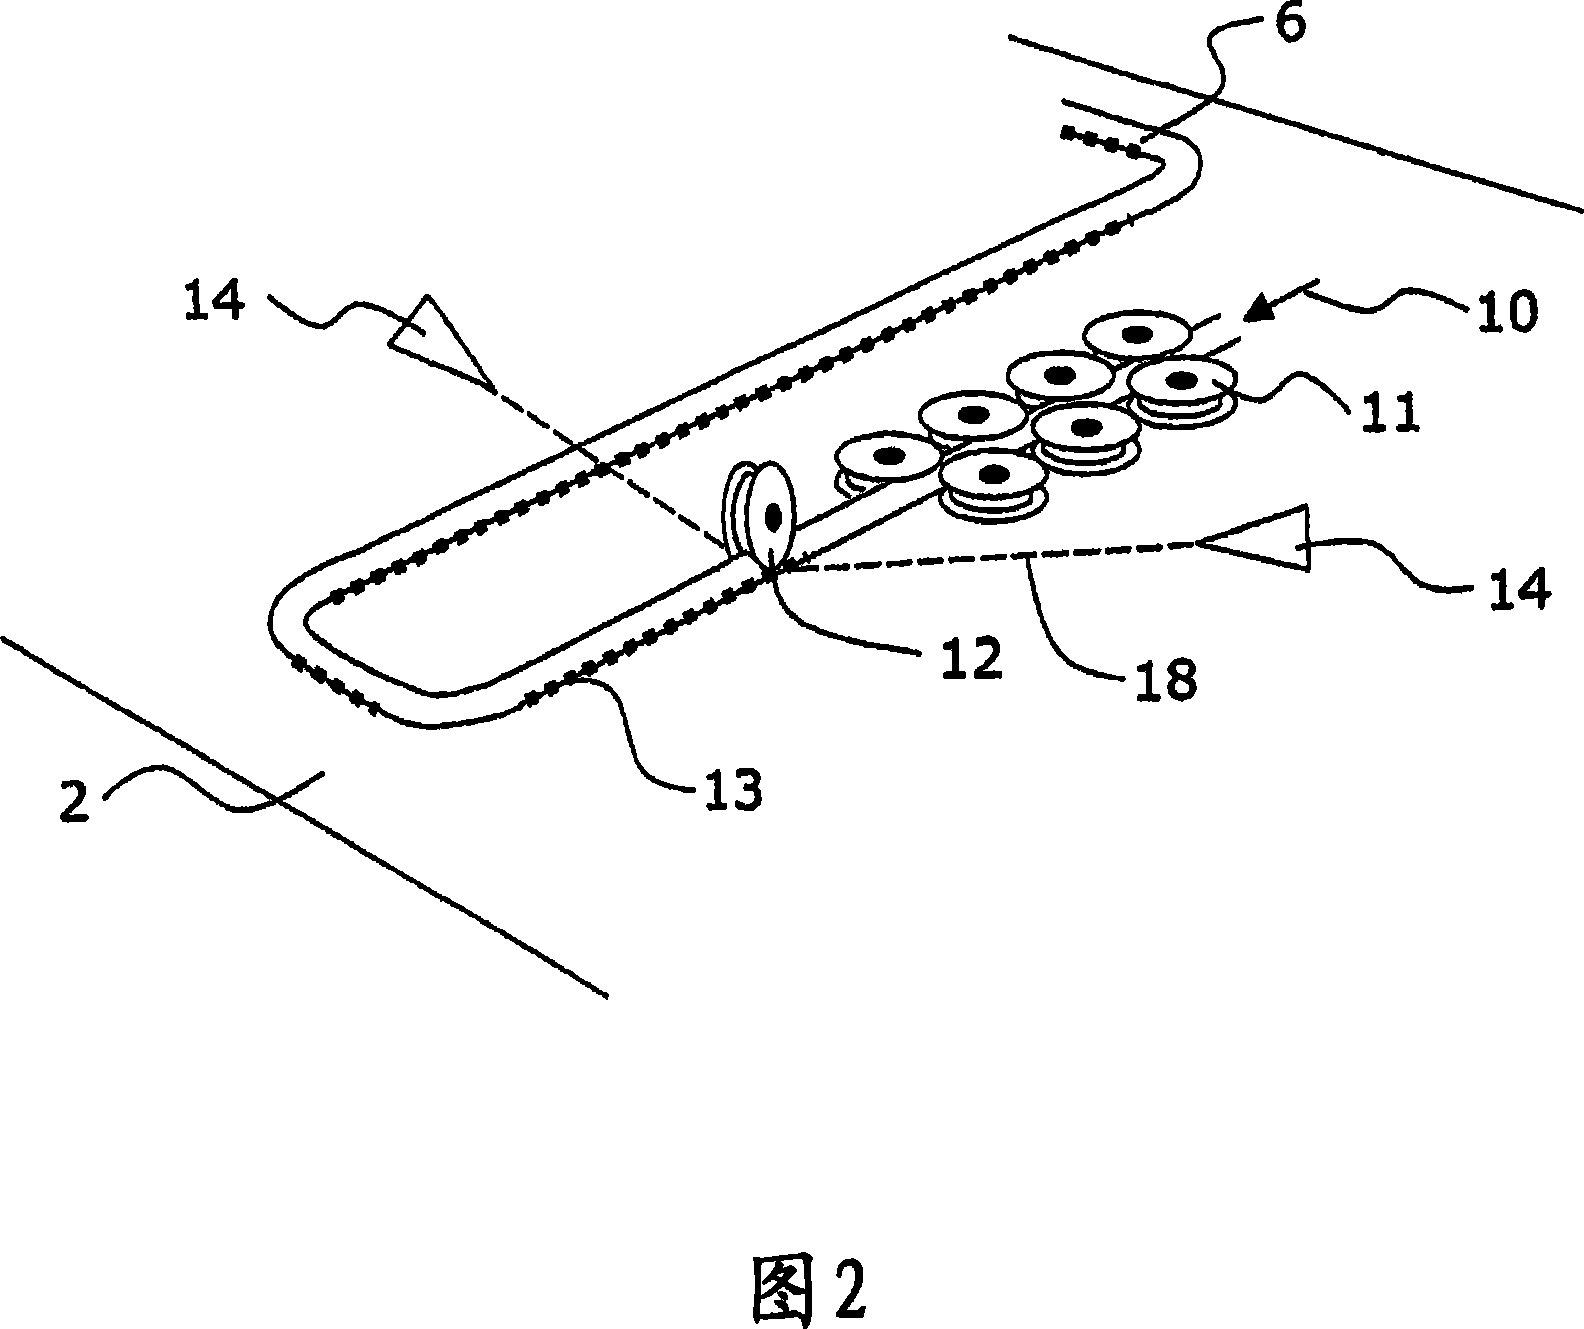 A method for manufacturing a heat-exchanger and a system for performing the method